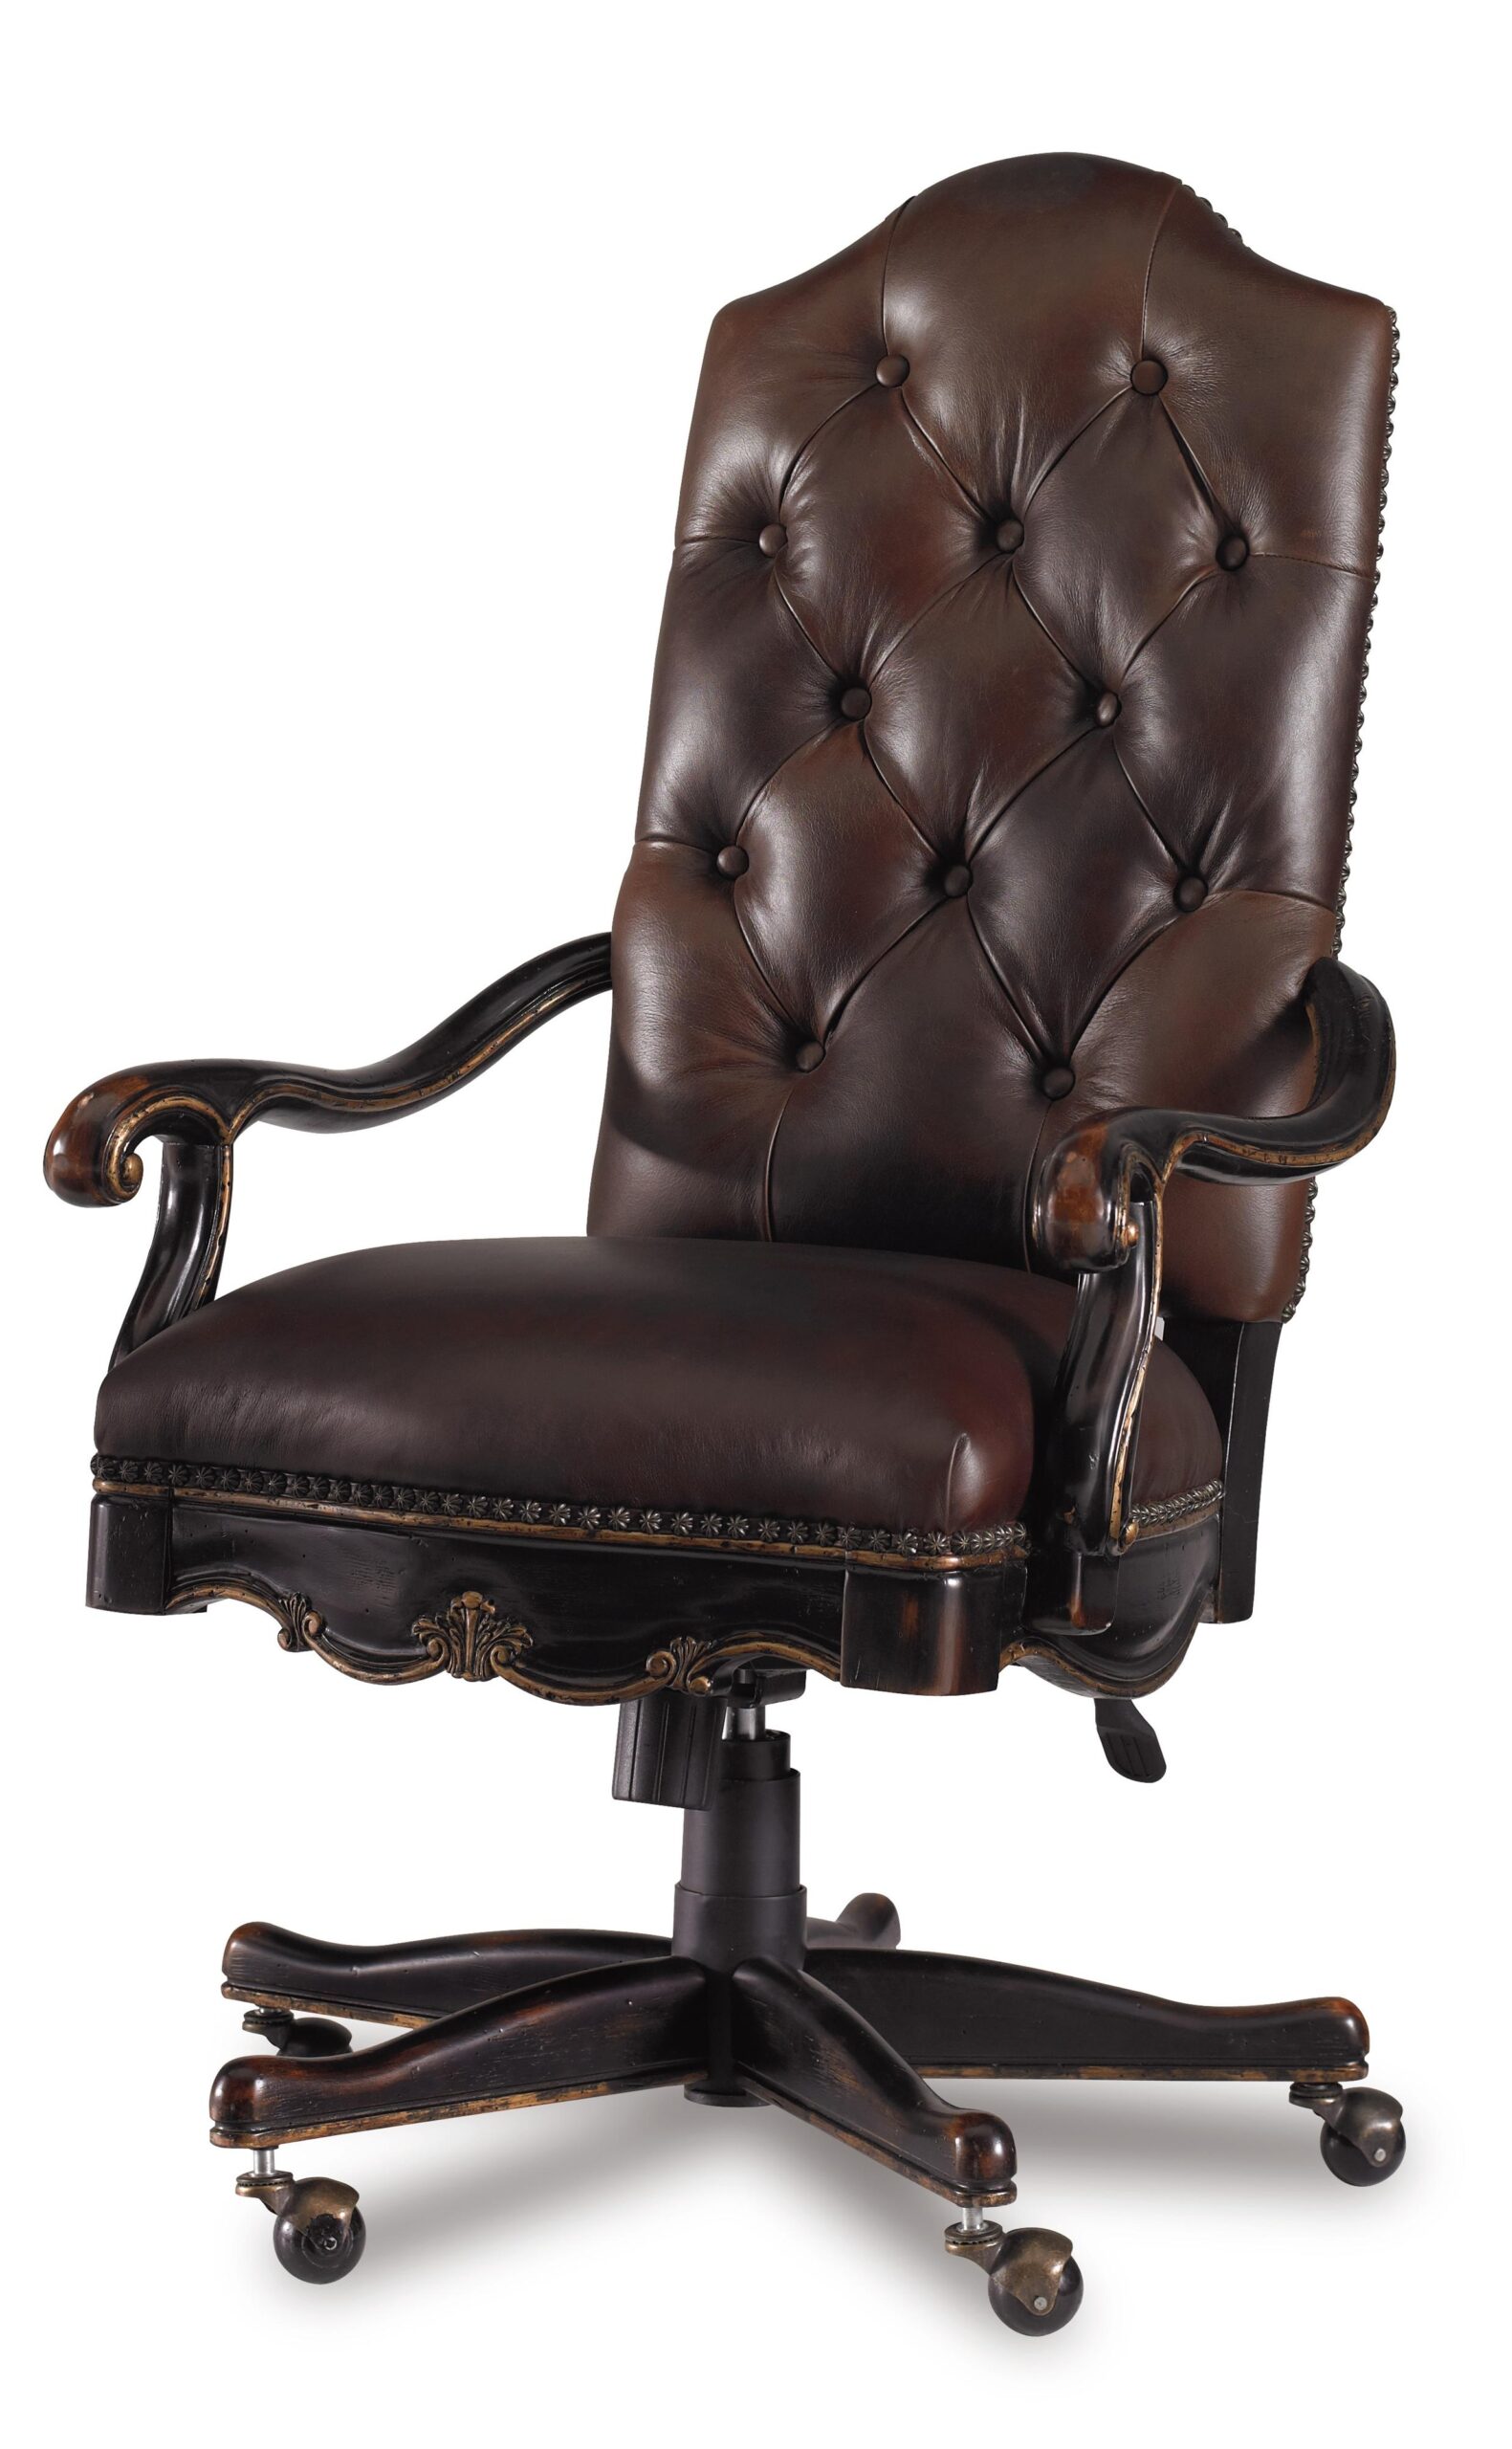 Leather Swivel Recliner Executive Office Chairs – decordip.com